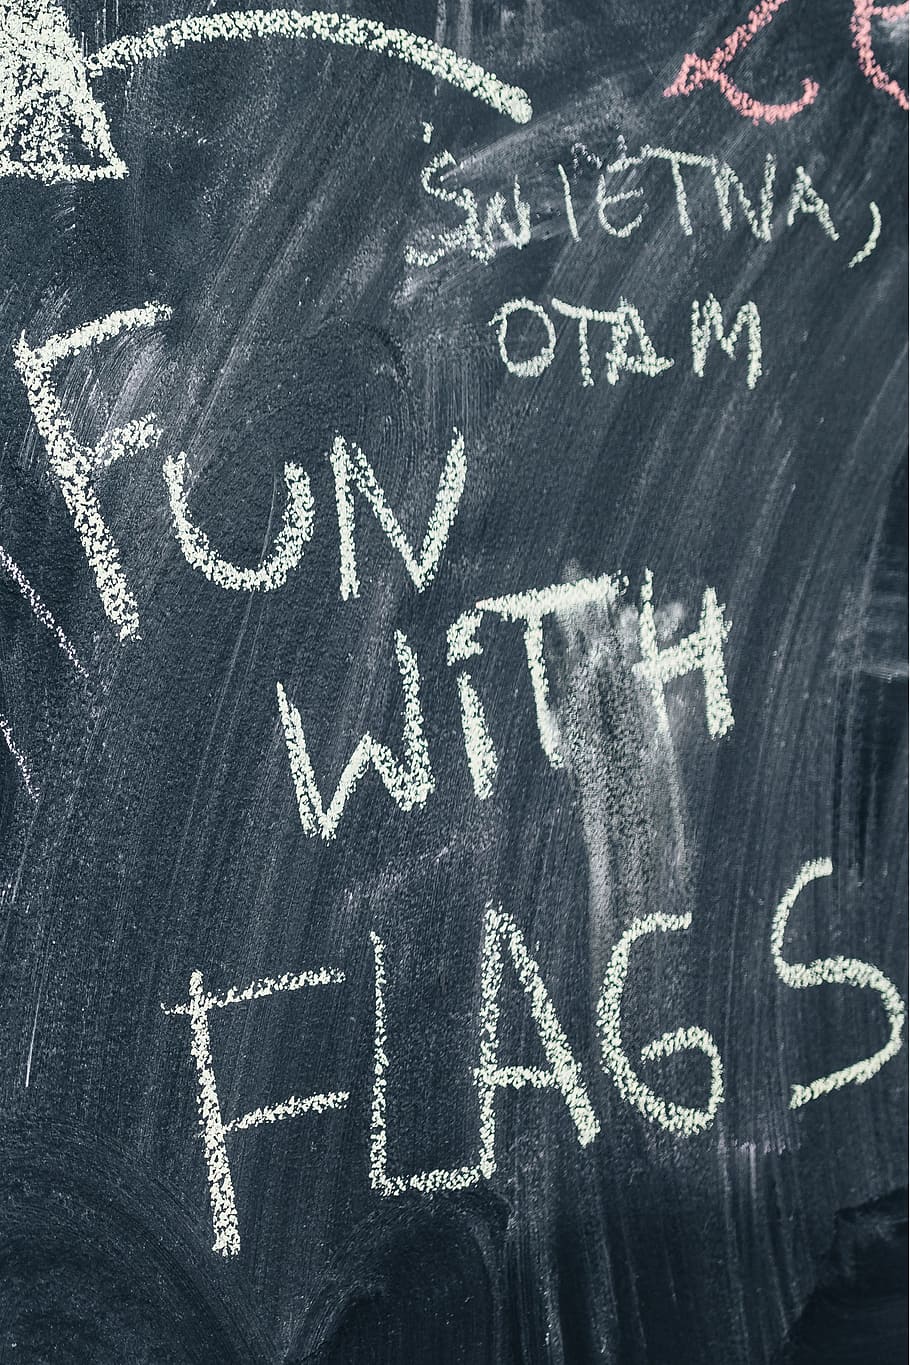 Chalkboard with handwritten words, black, sign, fun with flags